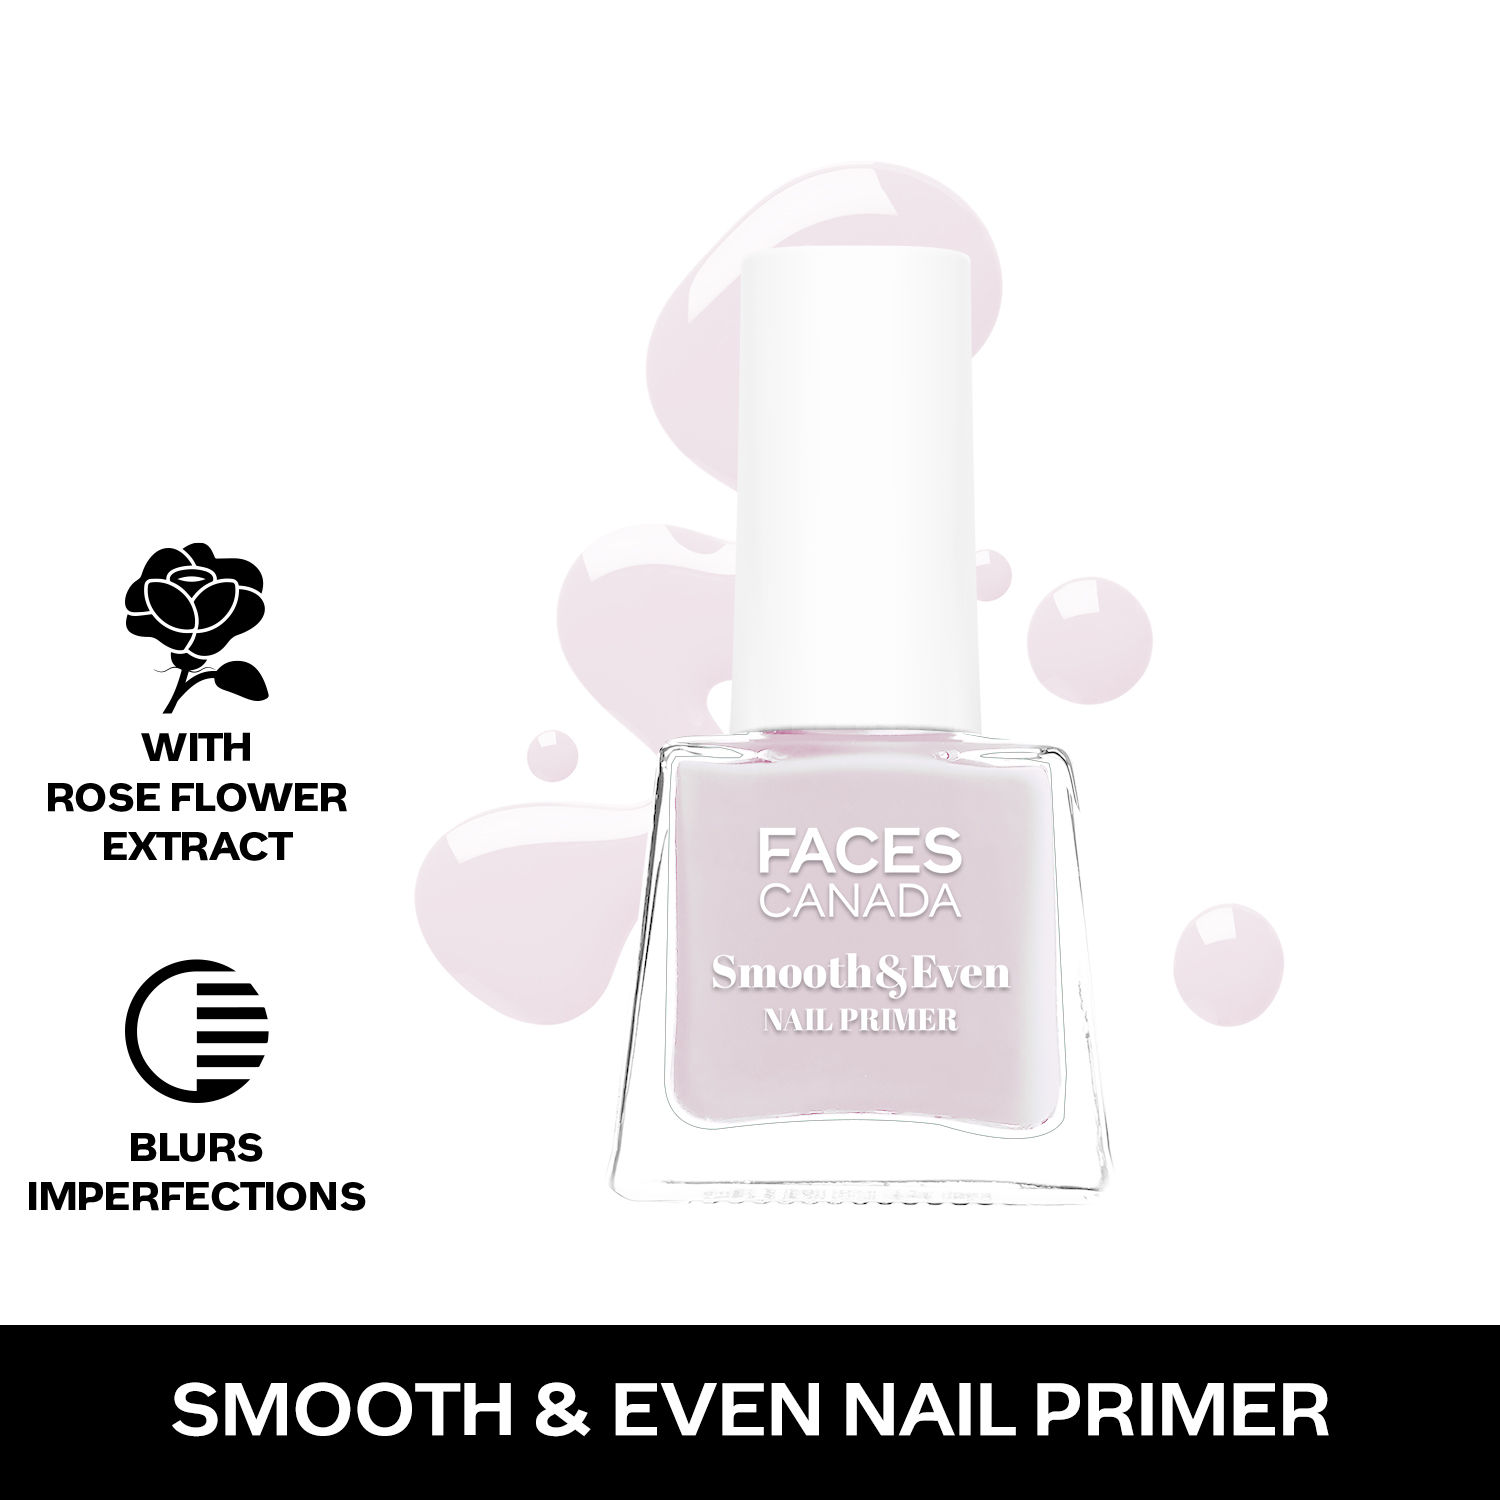 Buy FACES CANADA Smooth & Even Nail Primer, 5ml | Vitamin E & Rose Quartz | Rose Flower Extract | Satin Matte Finish | Hydrated, Nourished & Brighter Nails | Blurs Imperfections | Conceals Ridges - Purplle